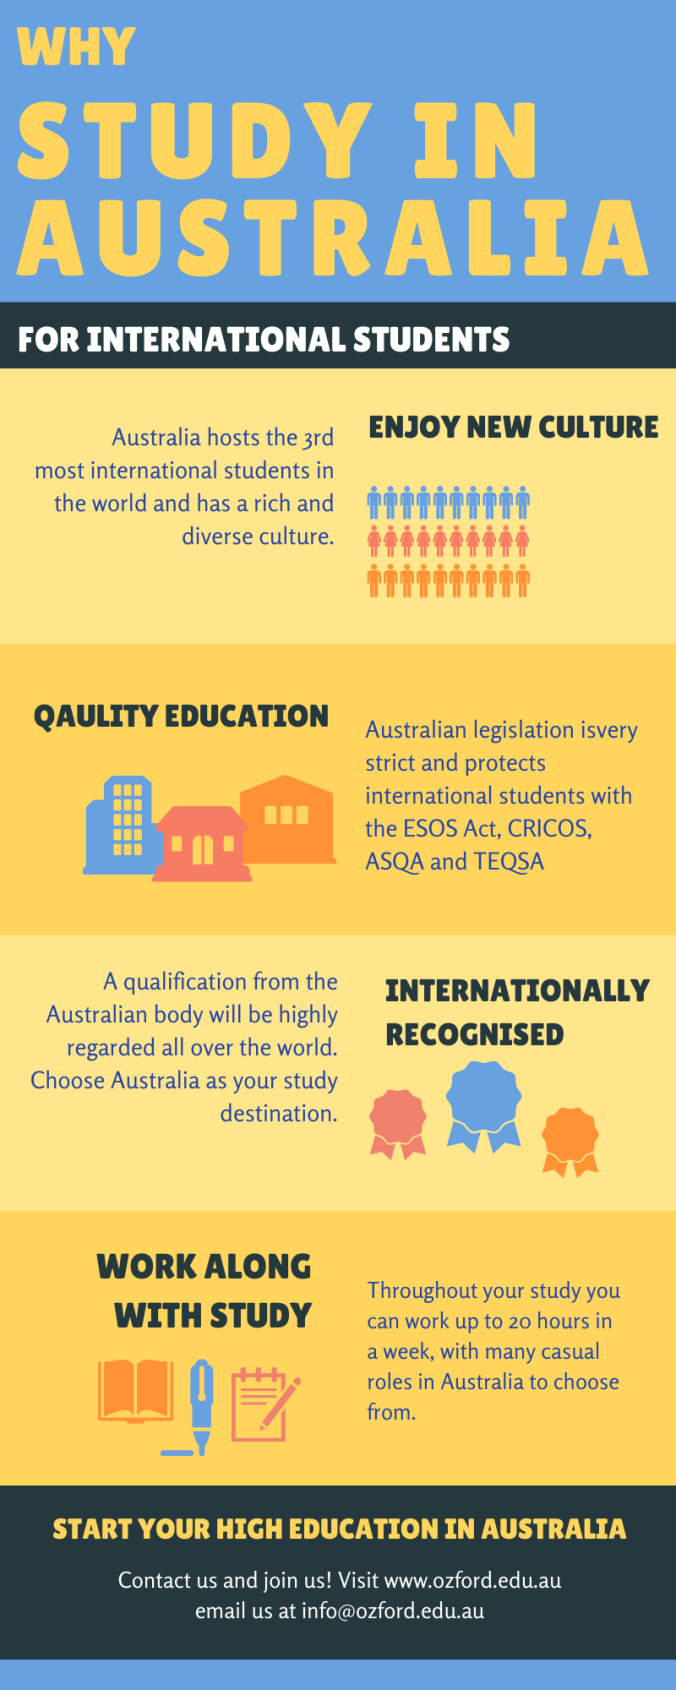 Why Australia’s Education is the Best in the World